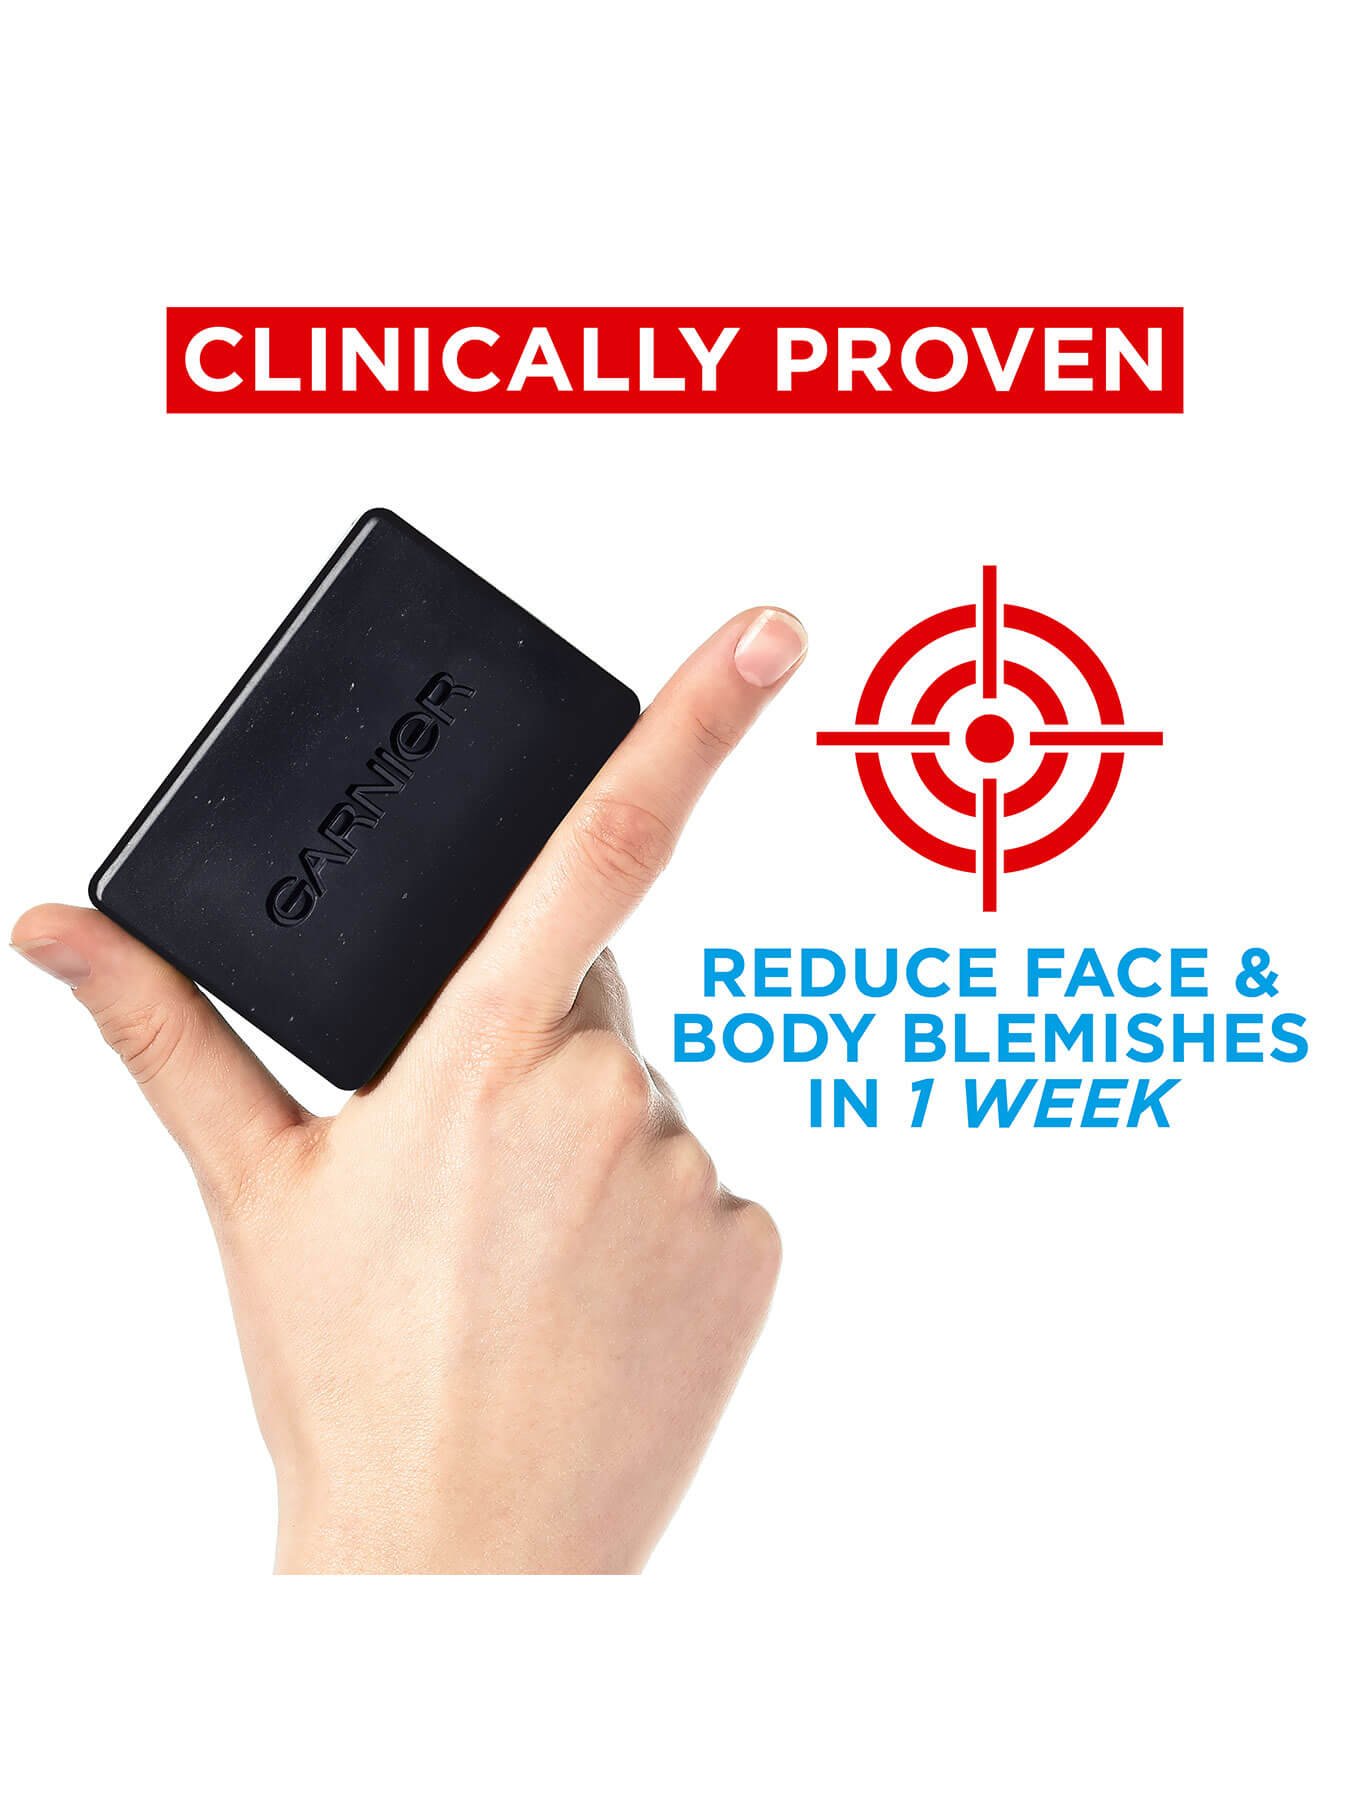 Garnier Pure Active Charcoal Bar with clinically proven label and target icon